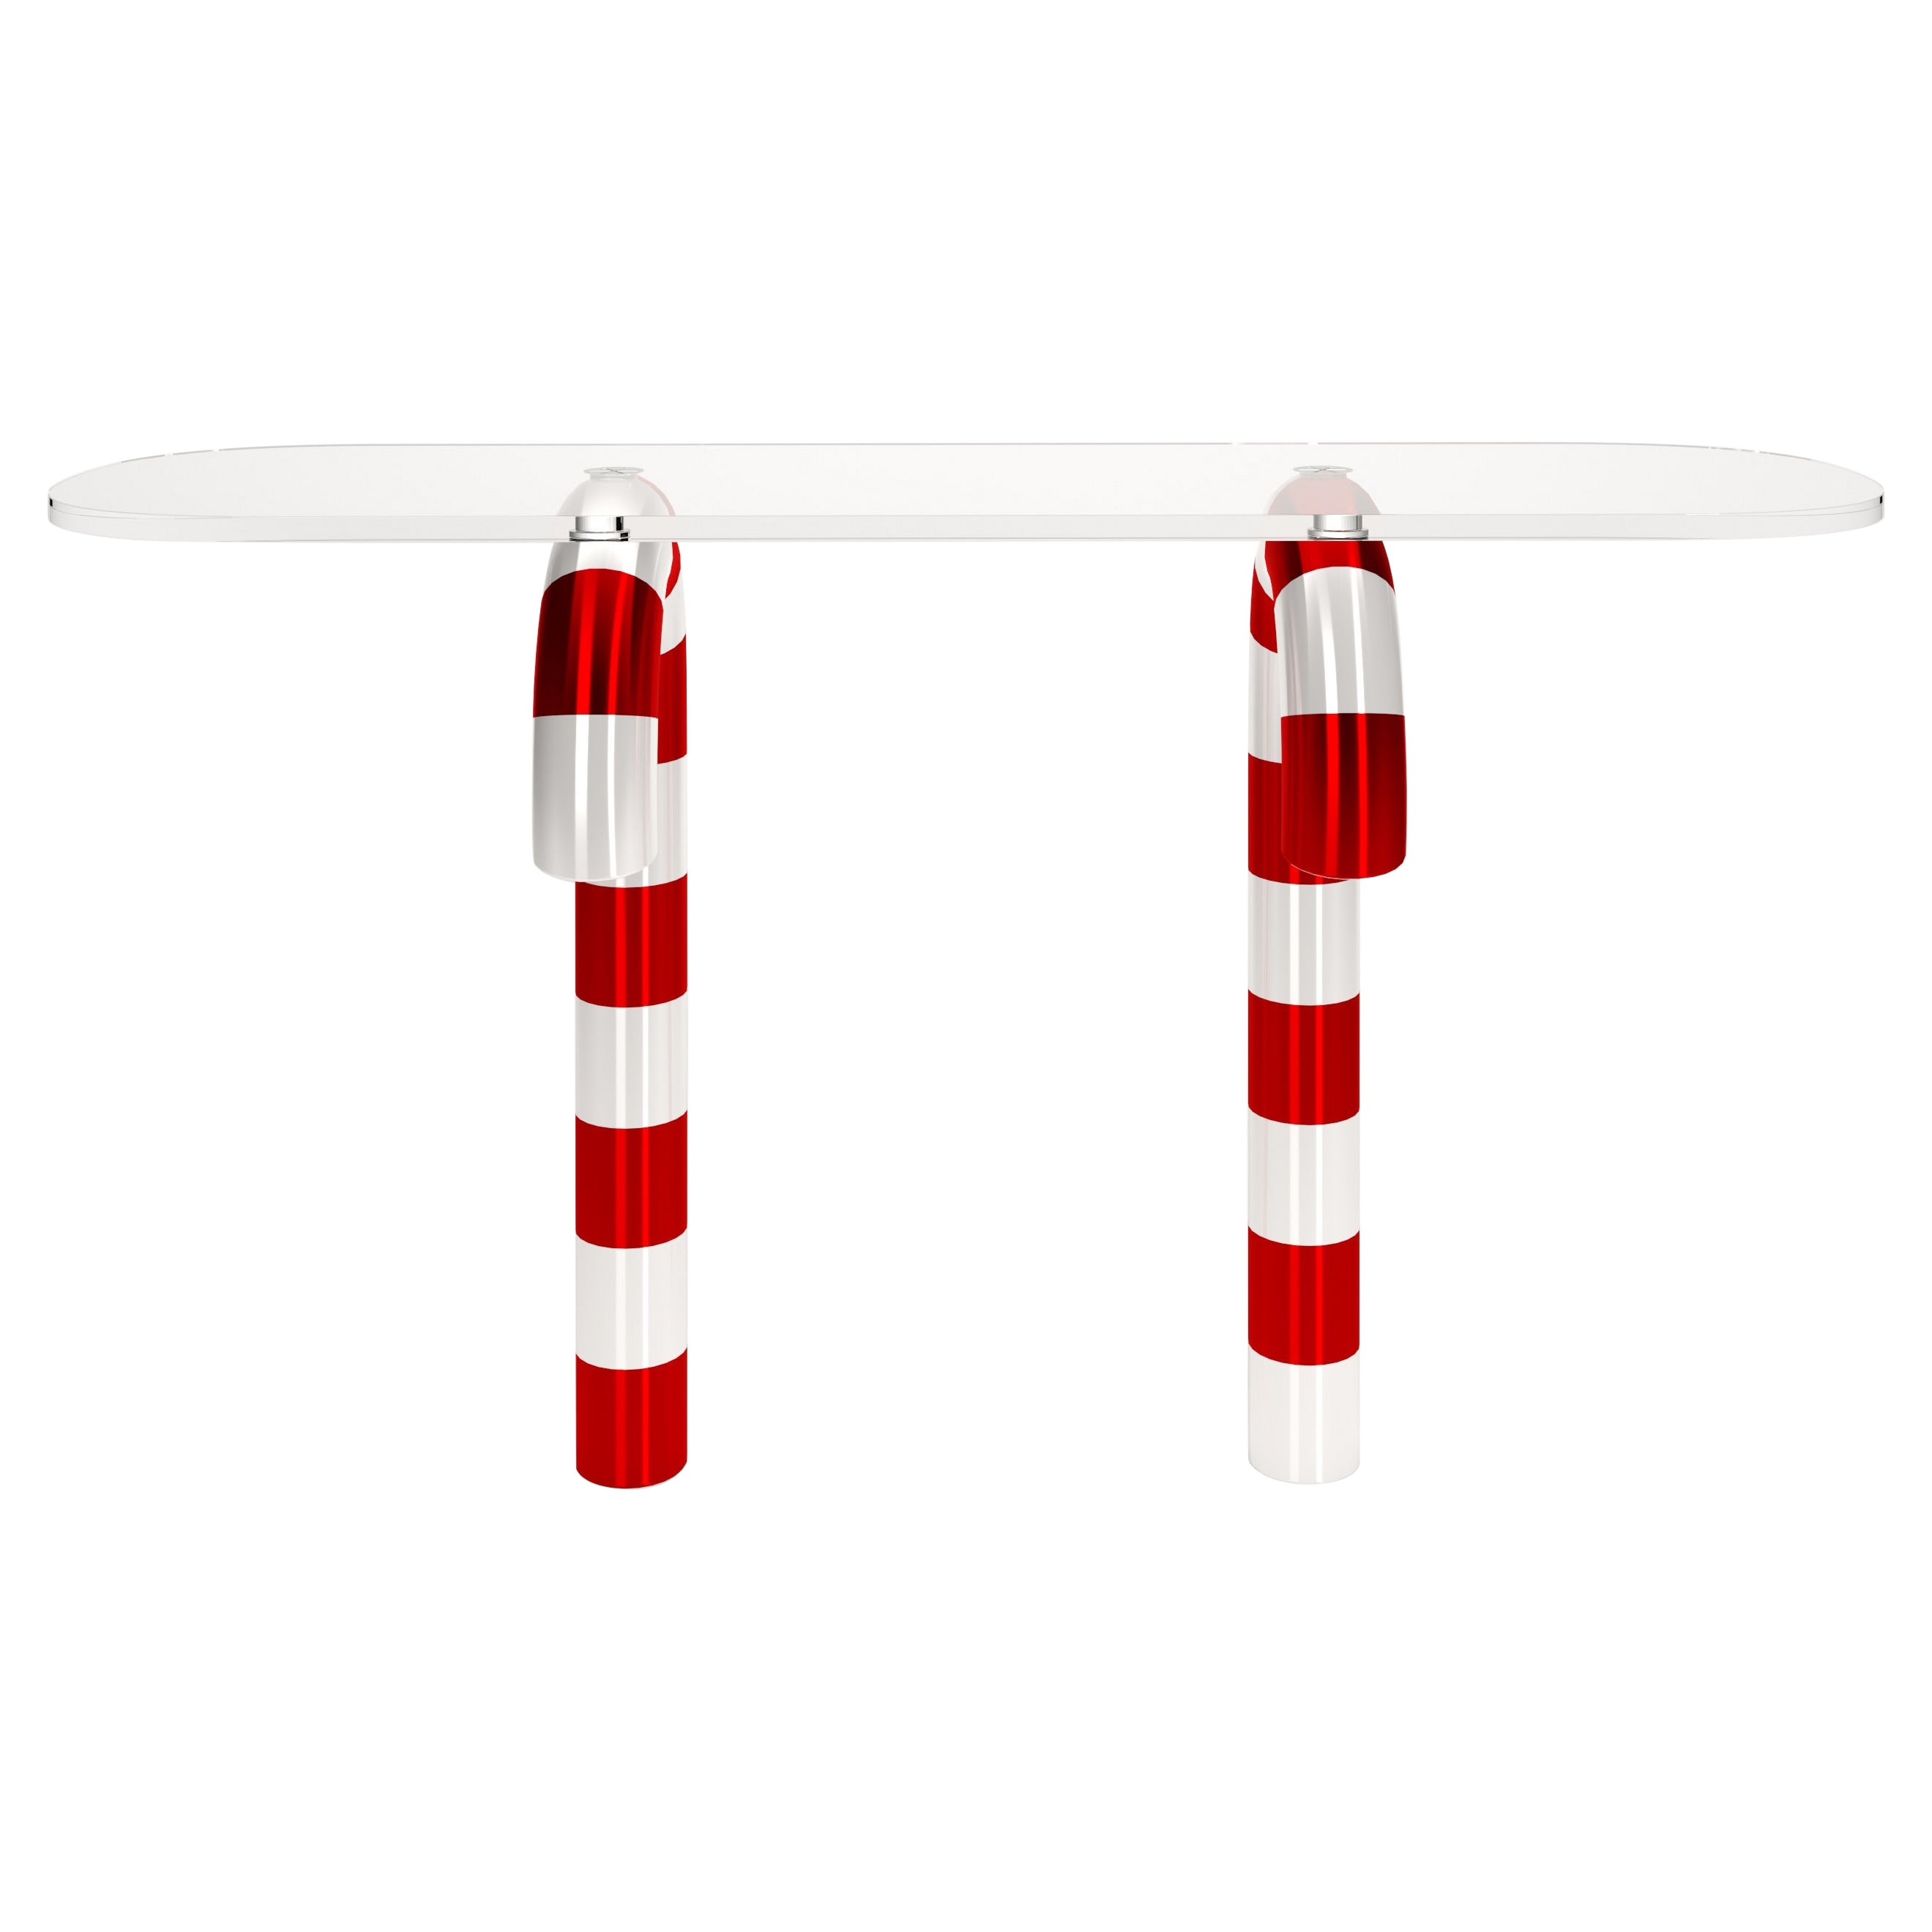 Tables consoles Modèle Giò Candy Cane Candy Collection by Studio Superego, Italy en vente